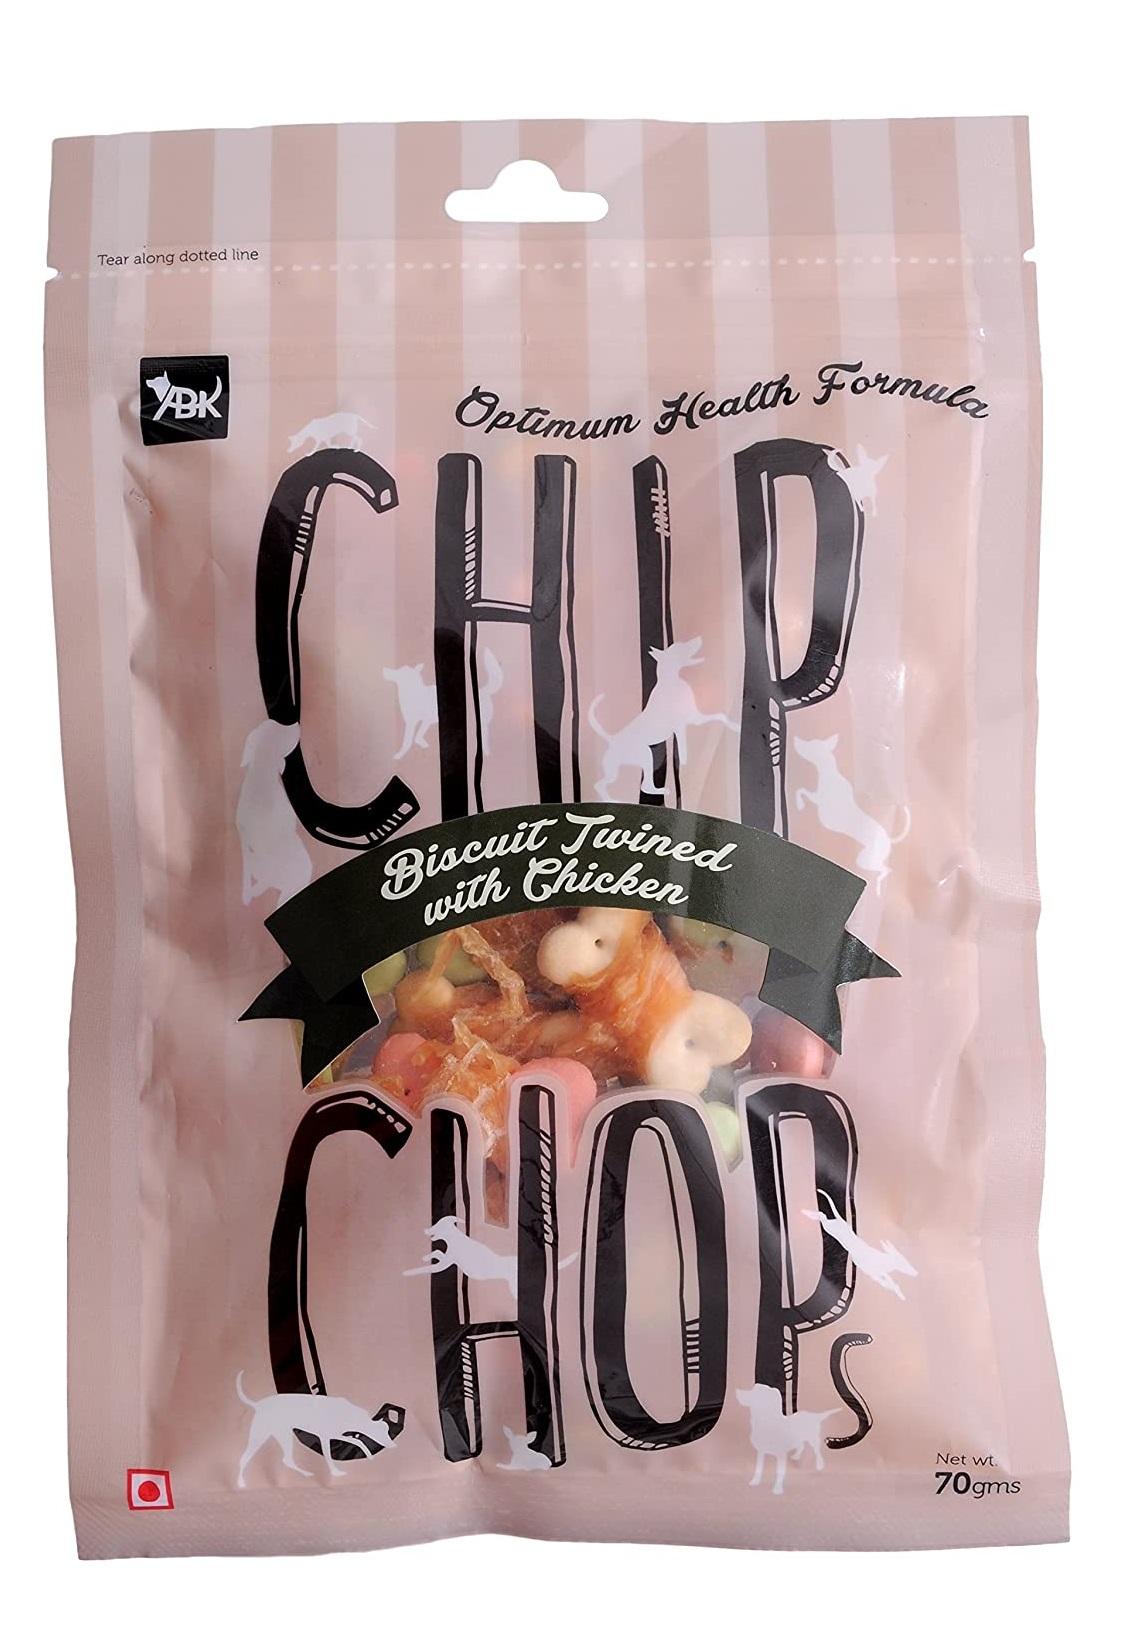 Chip Chops Dog Biscuit Twined with Chicken (70 g)